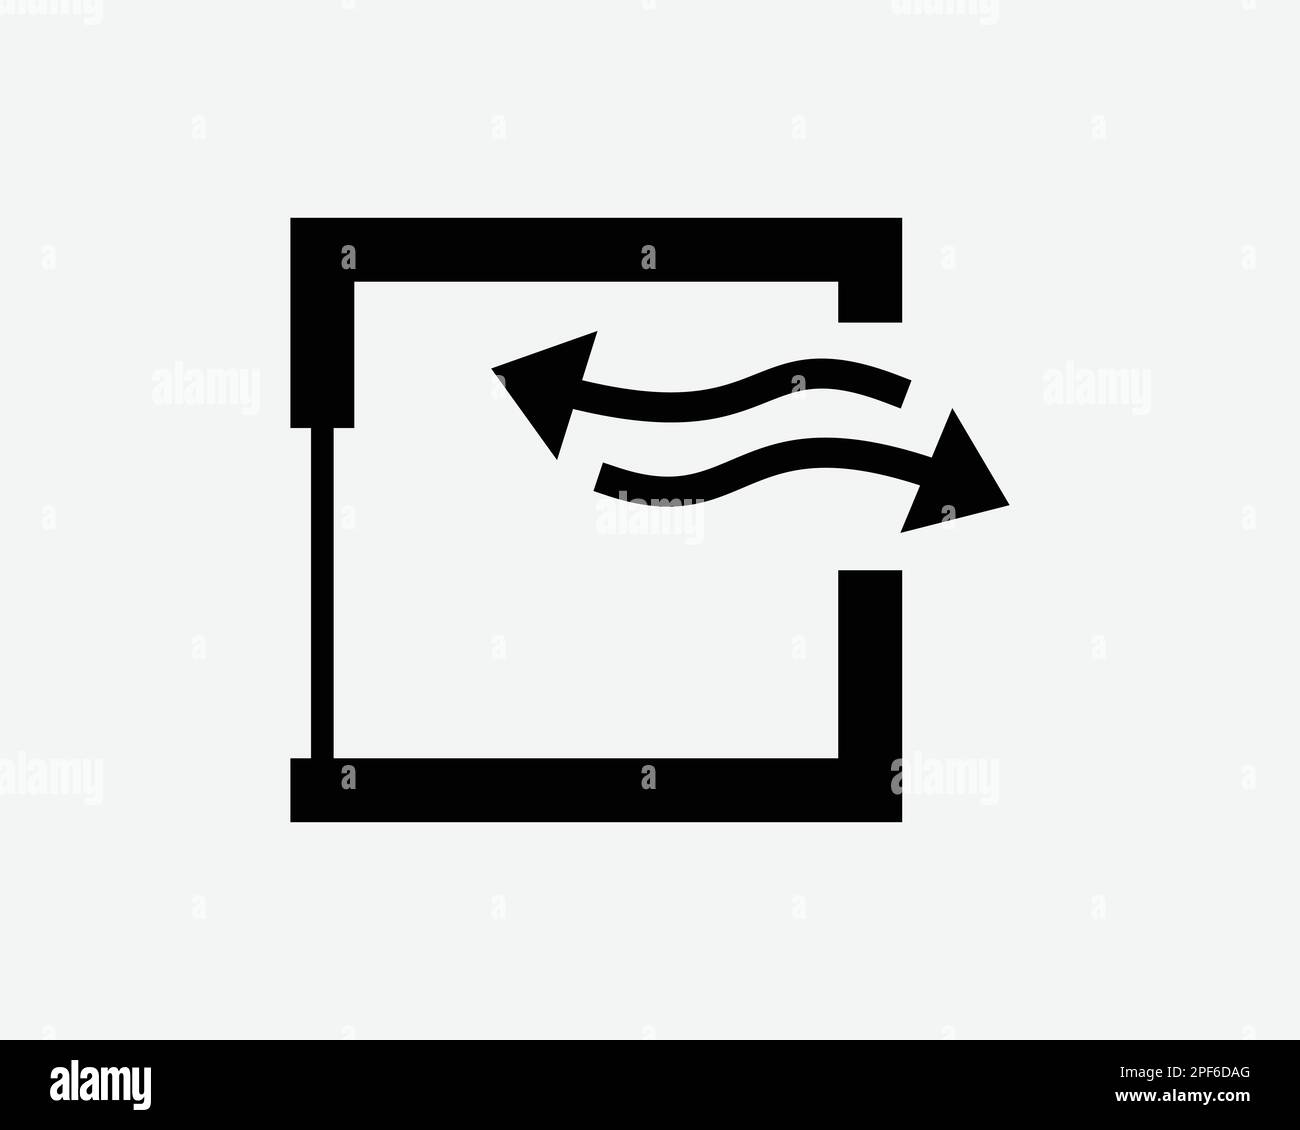 Ventilation Opening Window Air Flow Exchange Ventilate Black White Silhouette Symbol Icon Sign Graphic Clipart Artwork Illustration Pictogram Vector Stock Vector